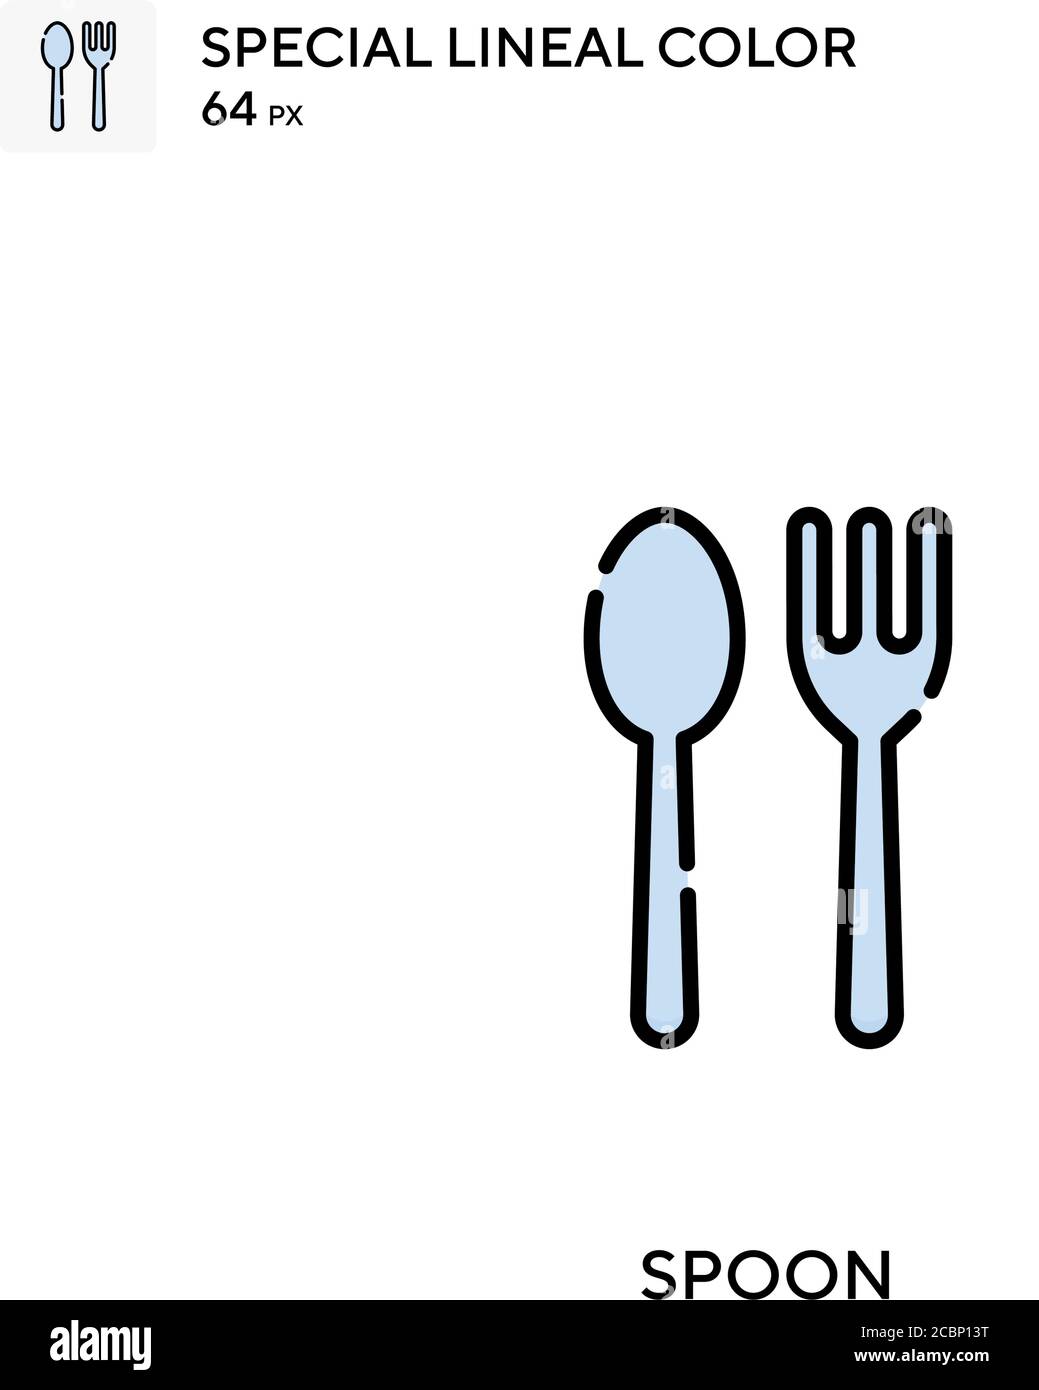 Spoon Special lineal color vector icon. Spoon icons for your business project Stock Vector